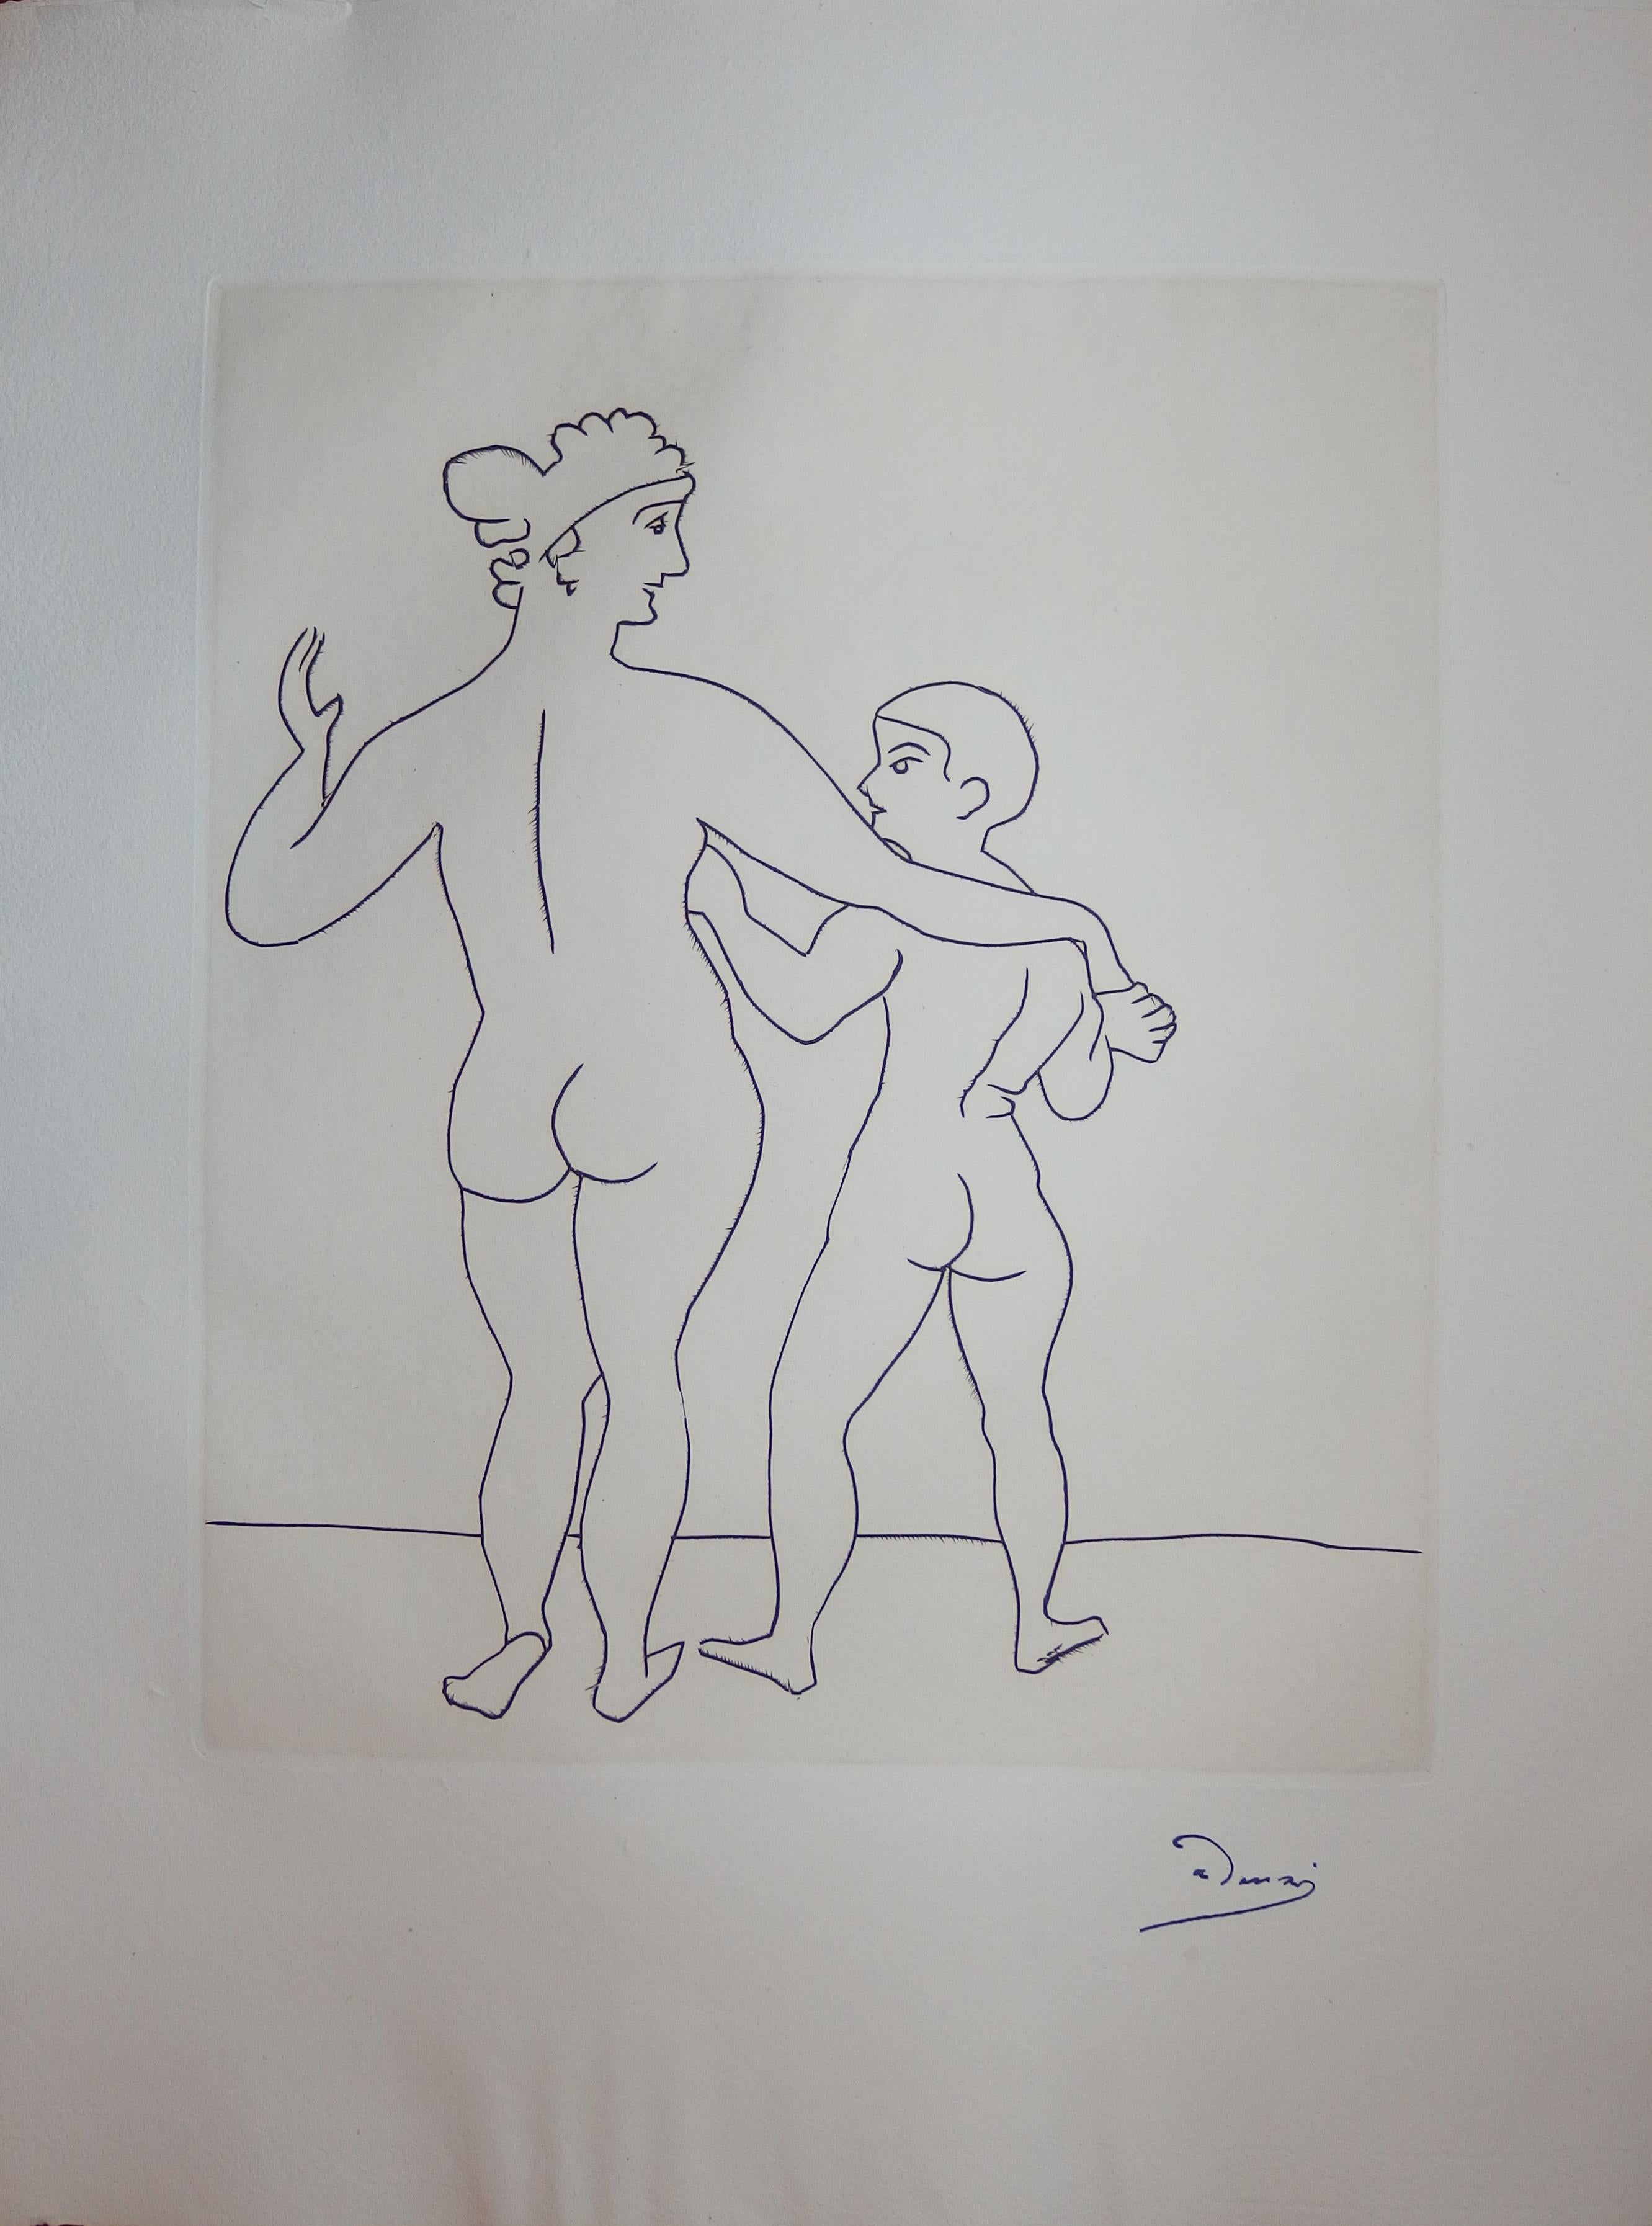 Such a Tall Woman - Original etching - 1951